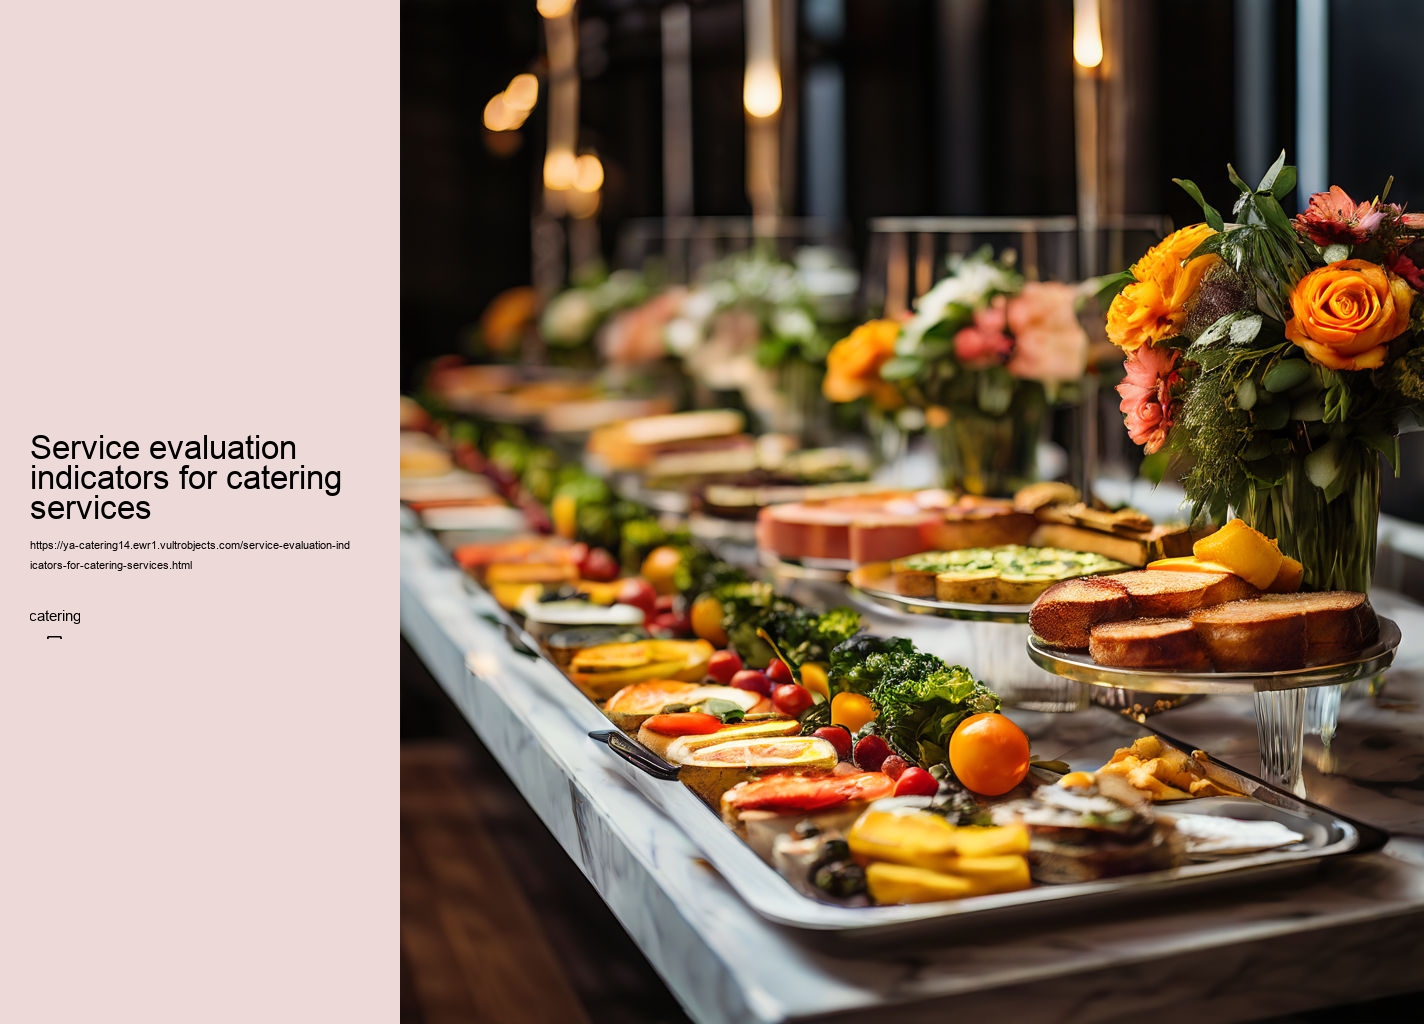 Service evaluation indicators for catering services